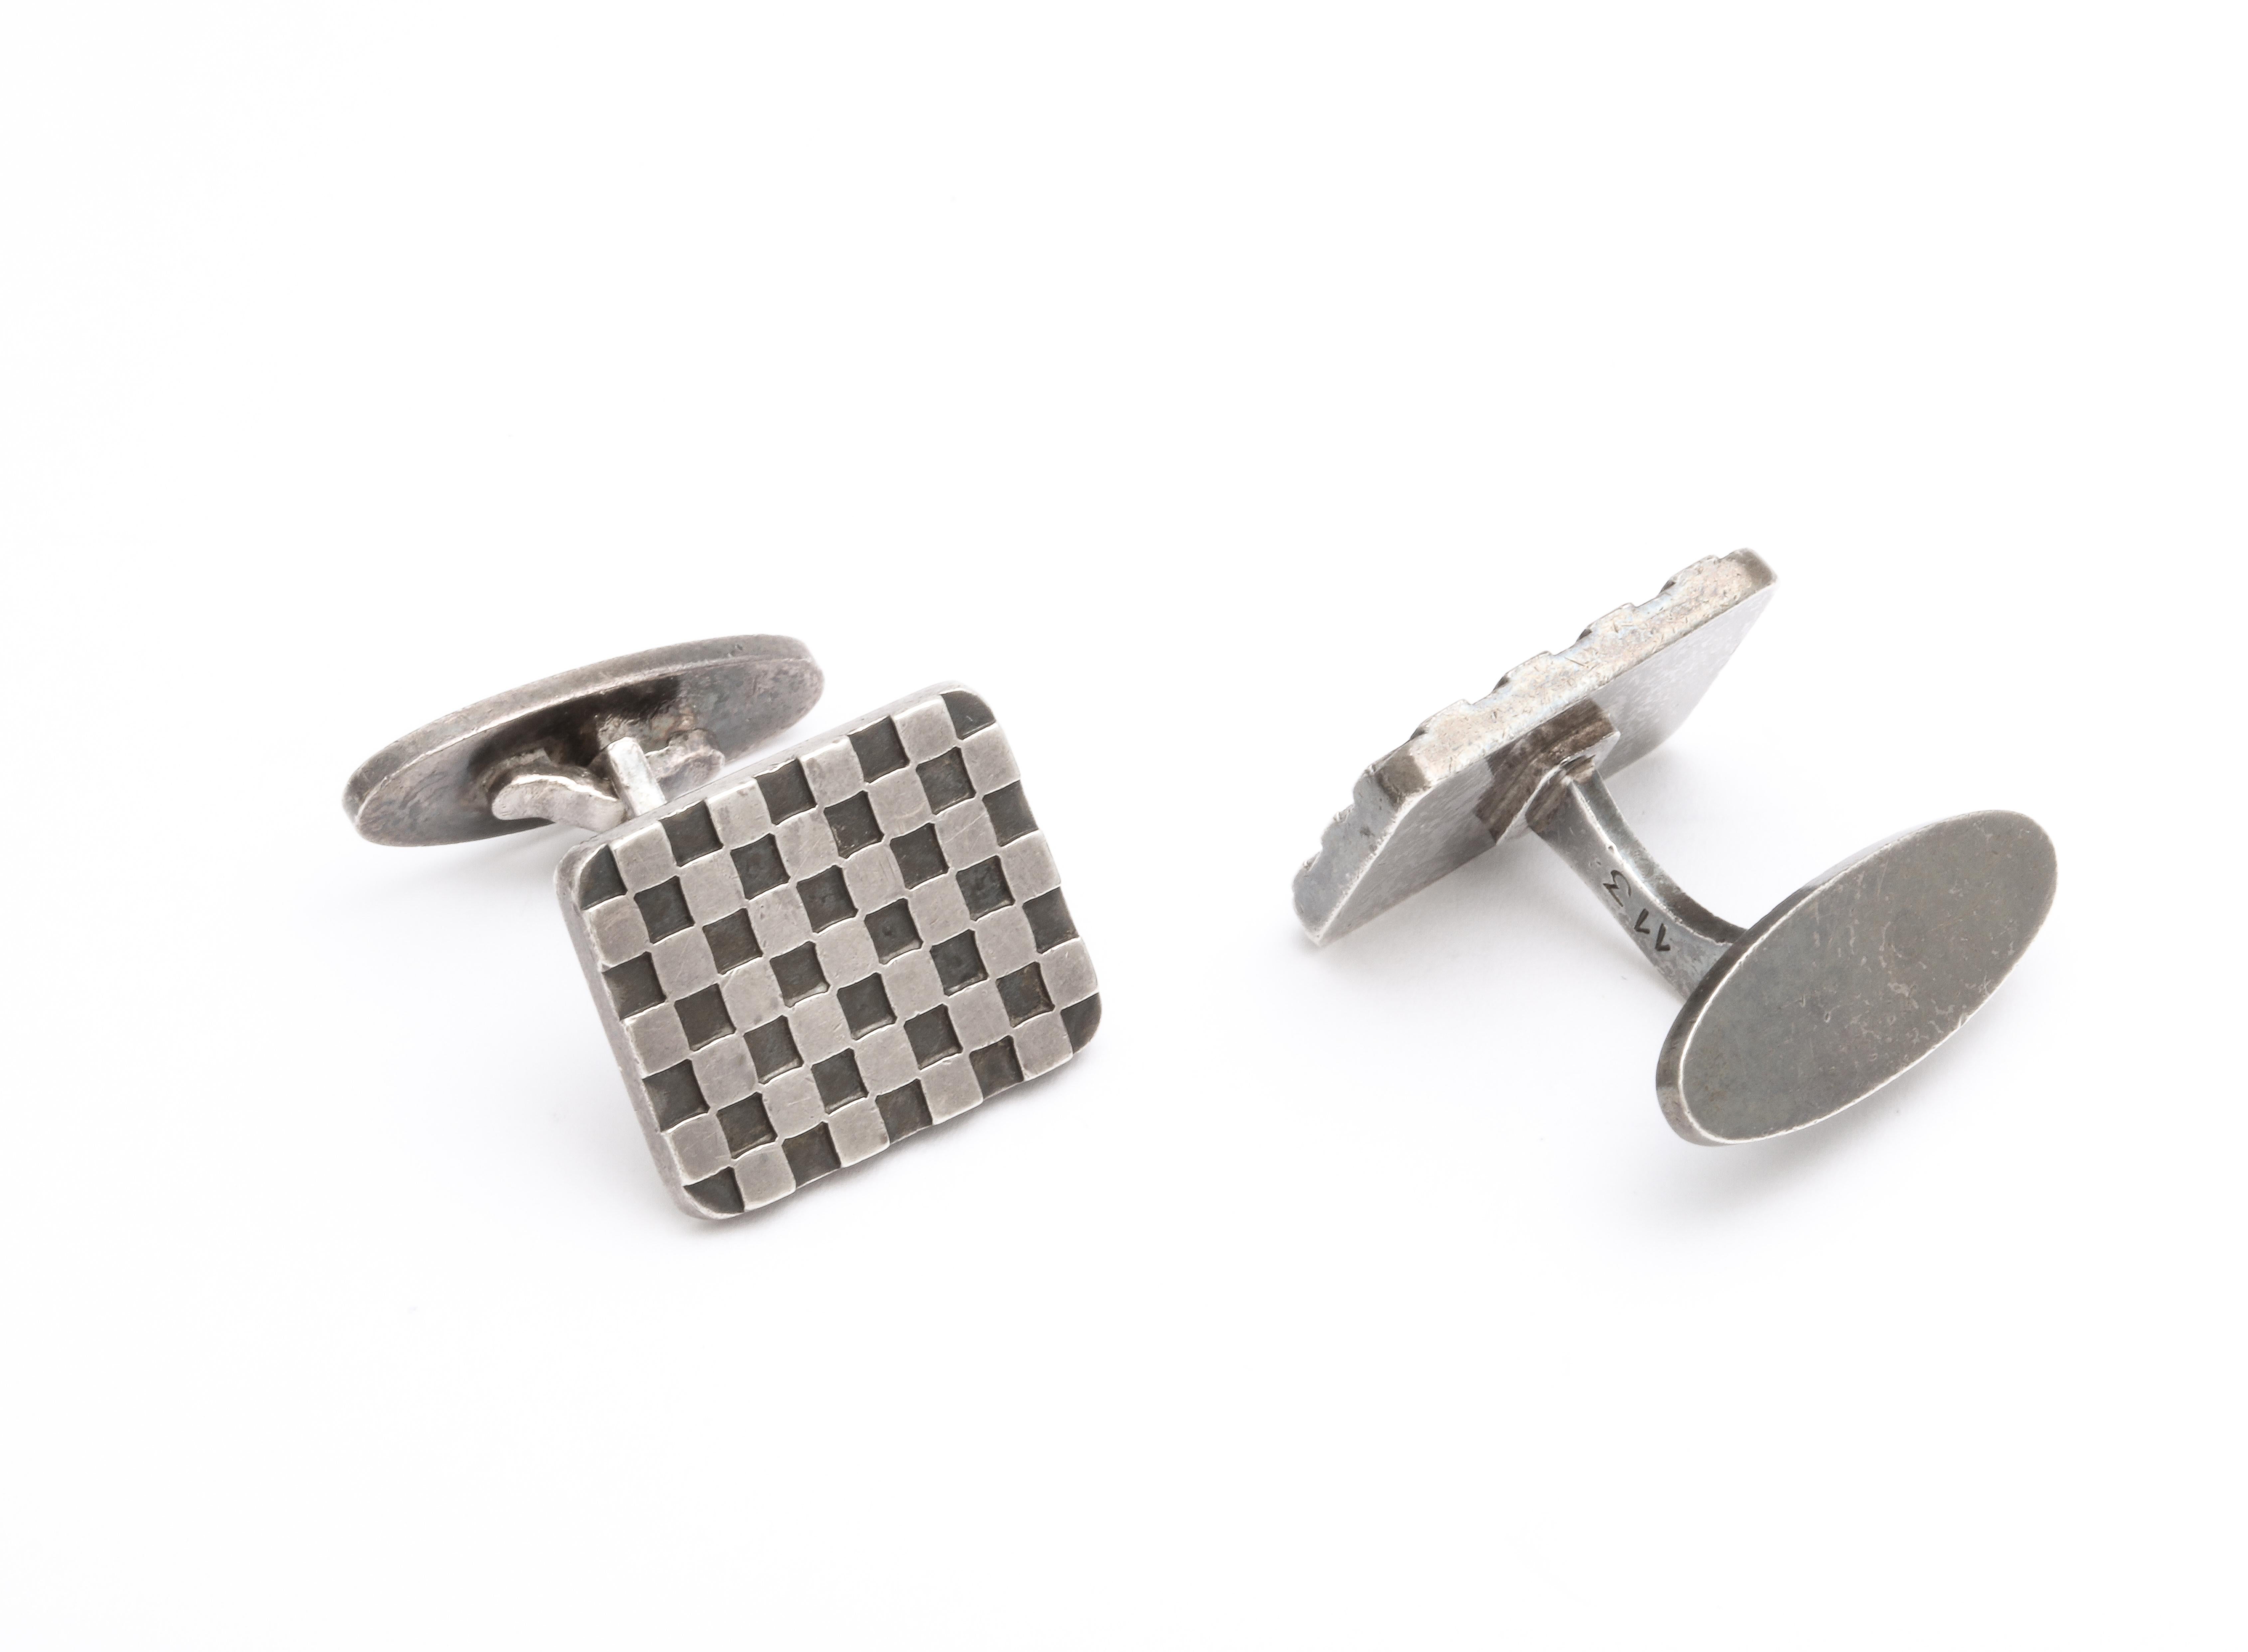 Cufflinks in the design of a checkerboard were made in the mid 20th century by Flemming Eskildsen, a designer for Georg Jensen. 
The design, #113, is recognizable from the game of checkers and was turned into colorful wood boards in the late 1800's